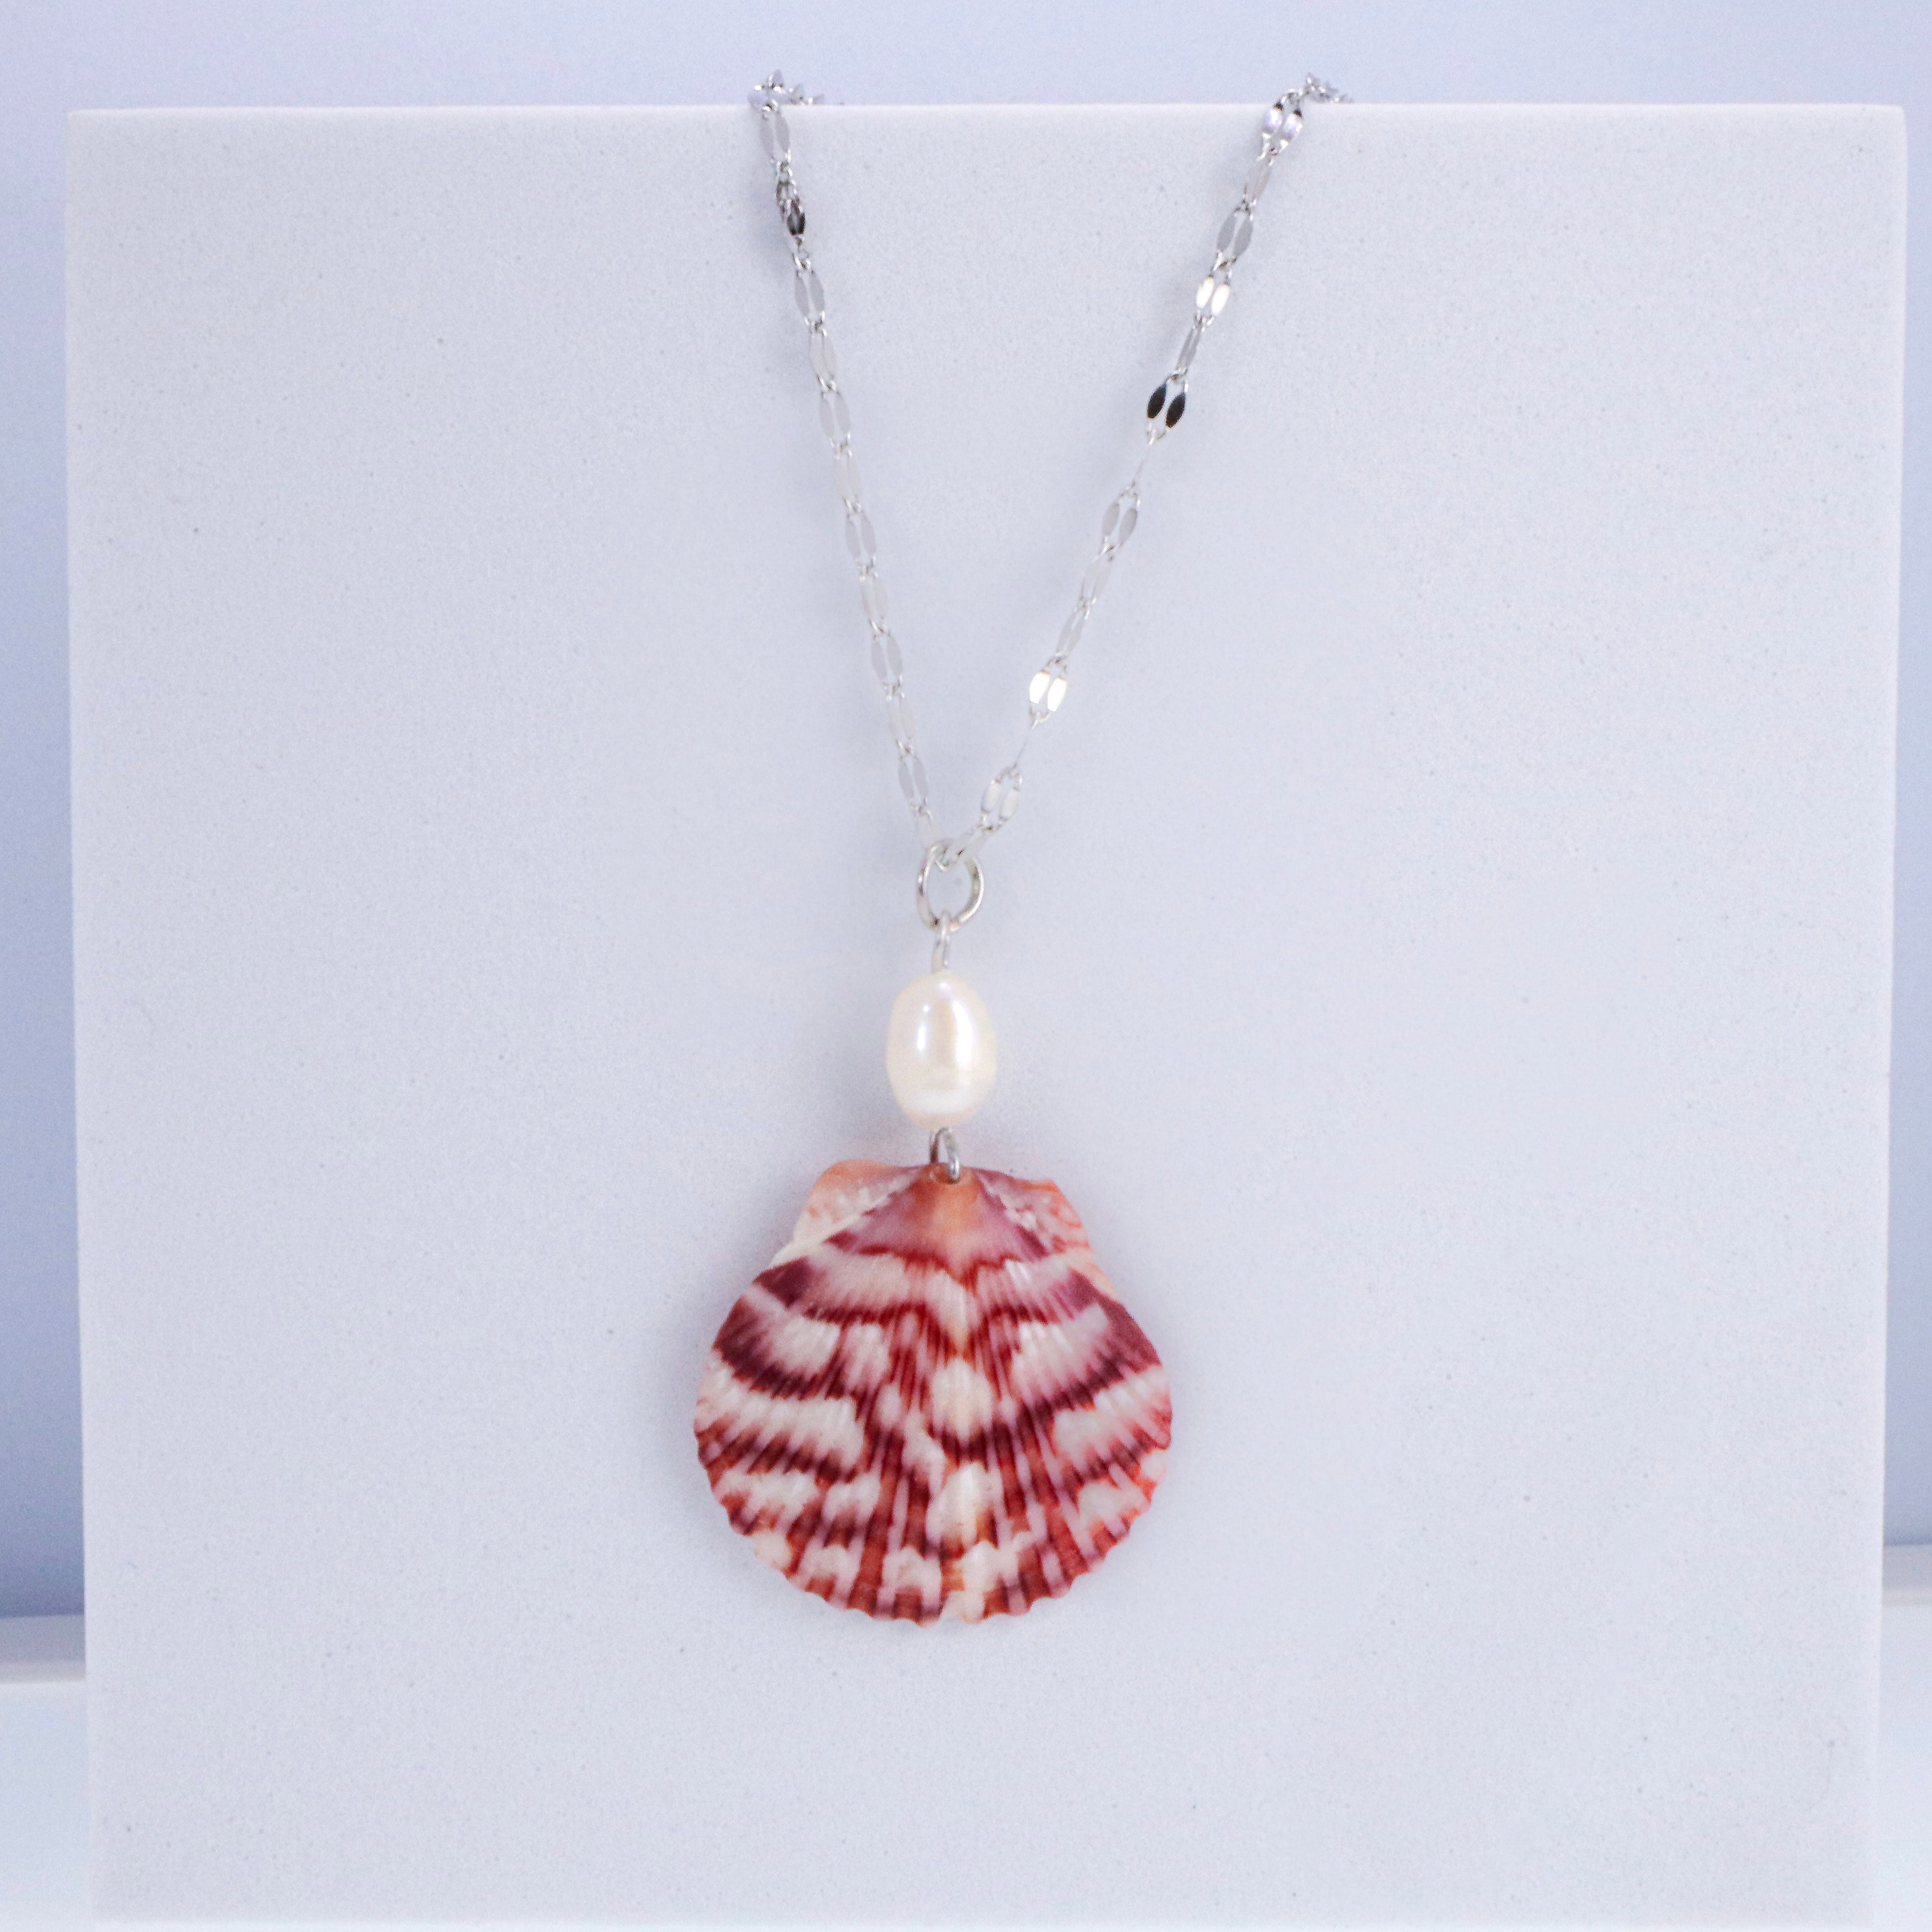 Calico Scallop Shell, Fresh Water Pearl & Stainless Steel Necklace